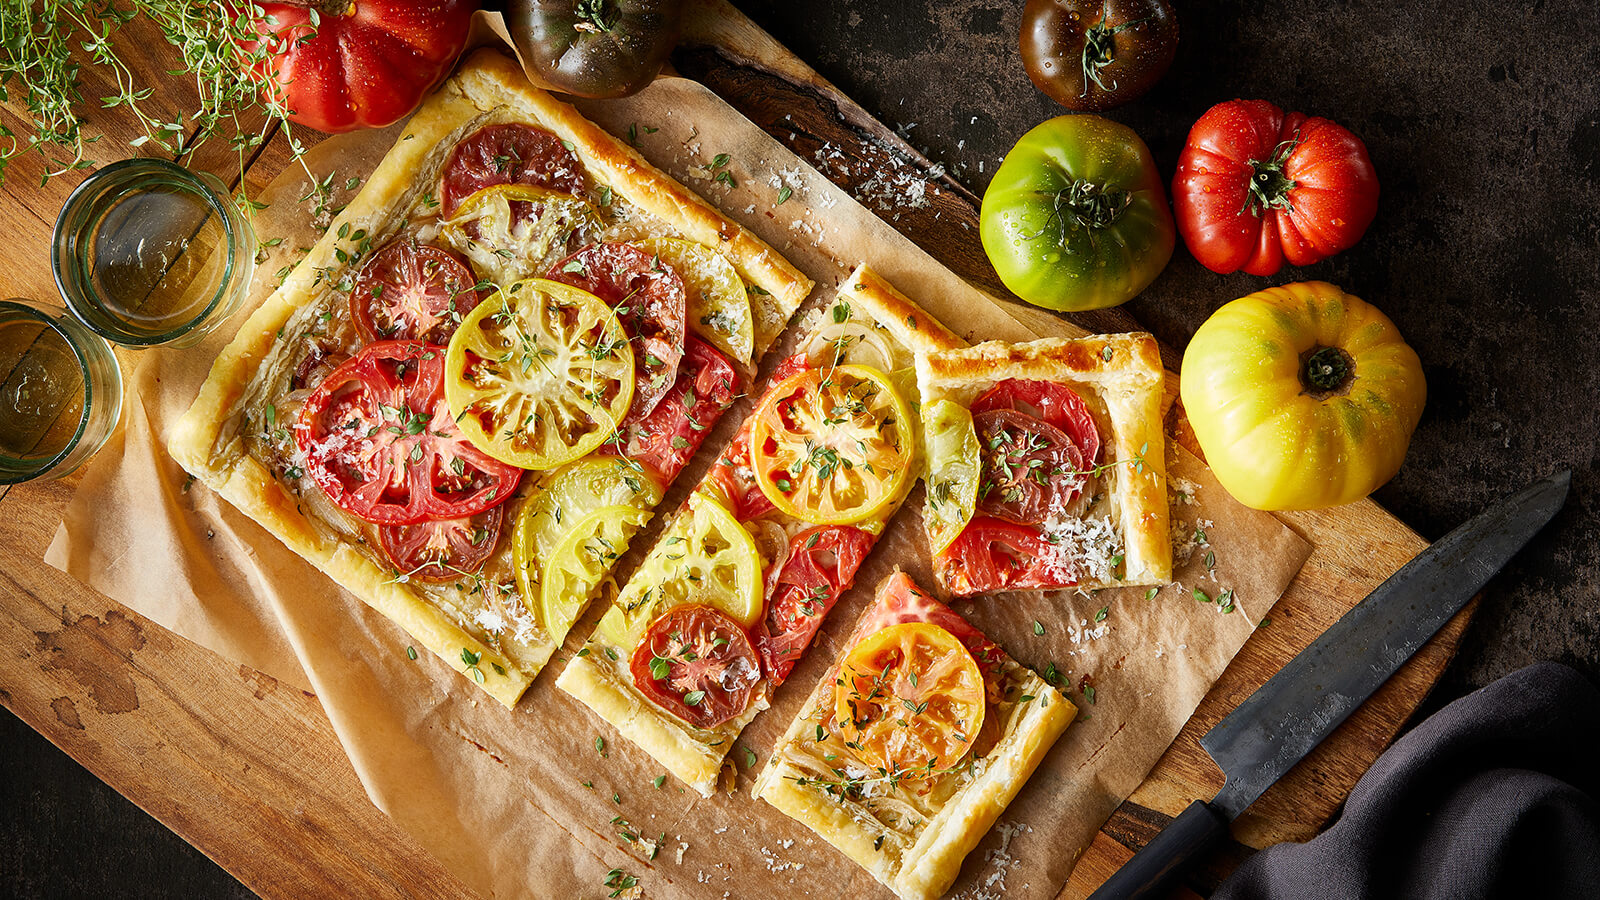 Heirloom Tomato Tart with Caramelized Onions and Gruyere